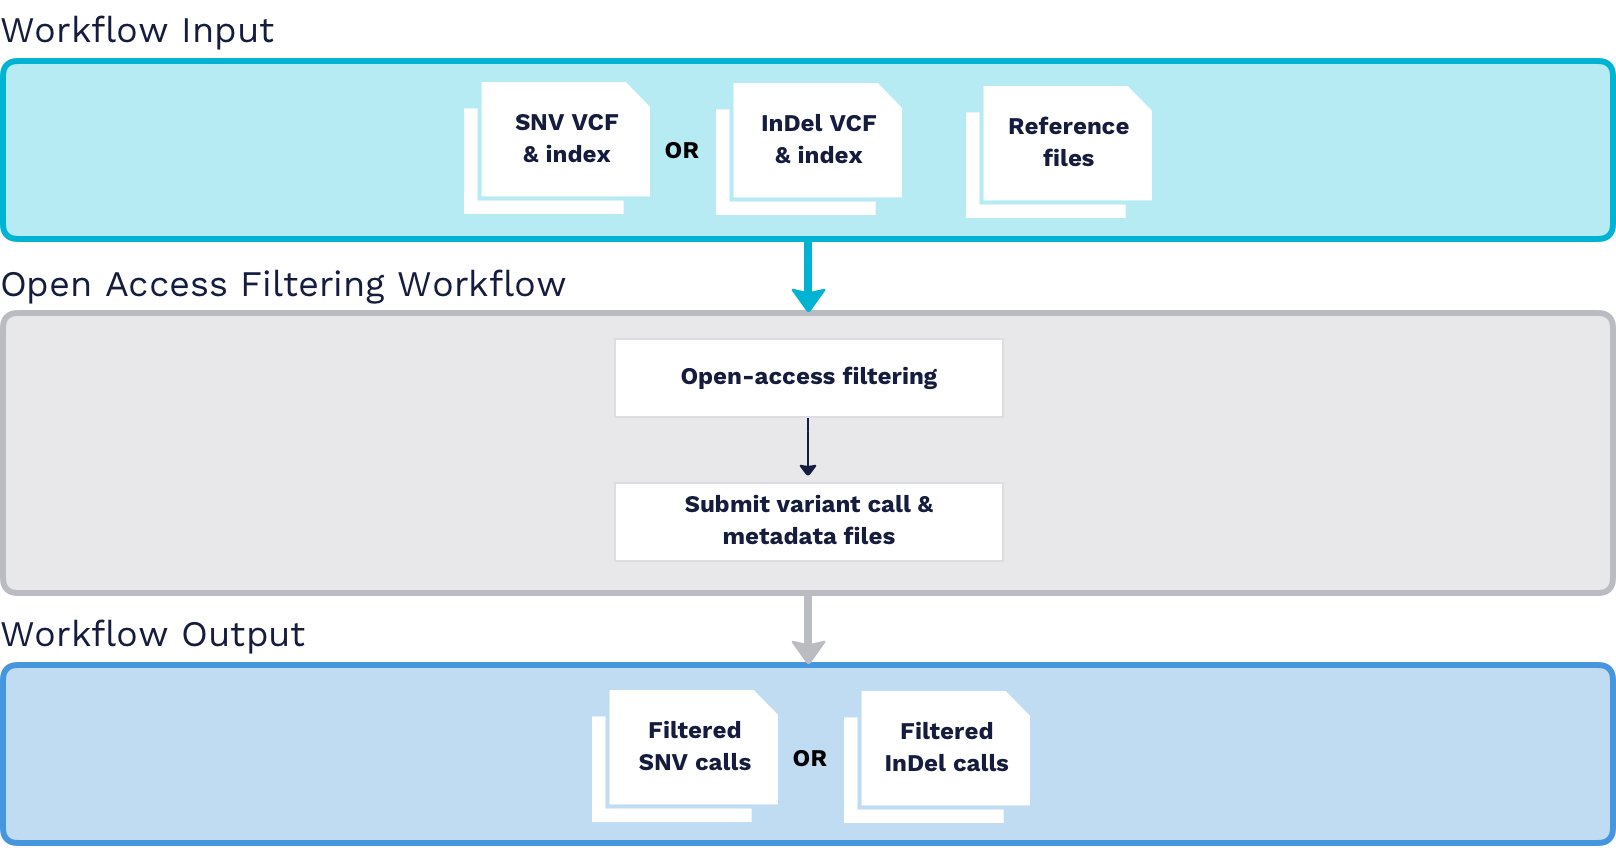 Open Access Filtering Workflow